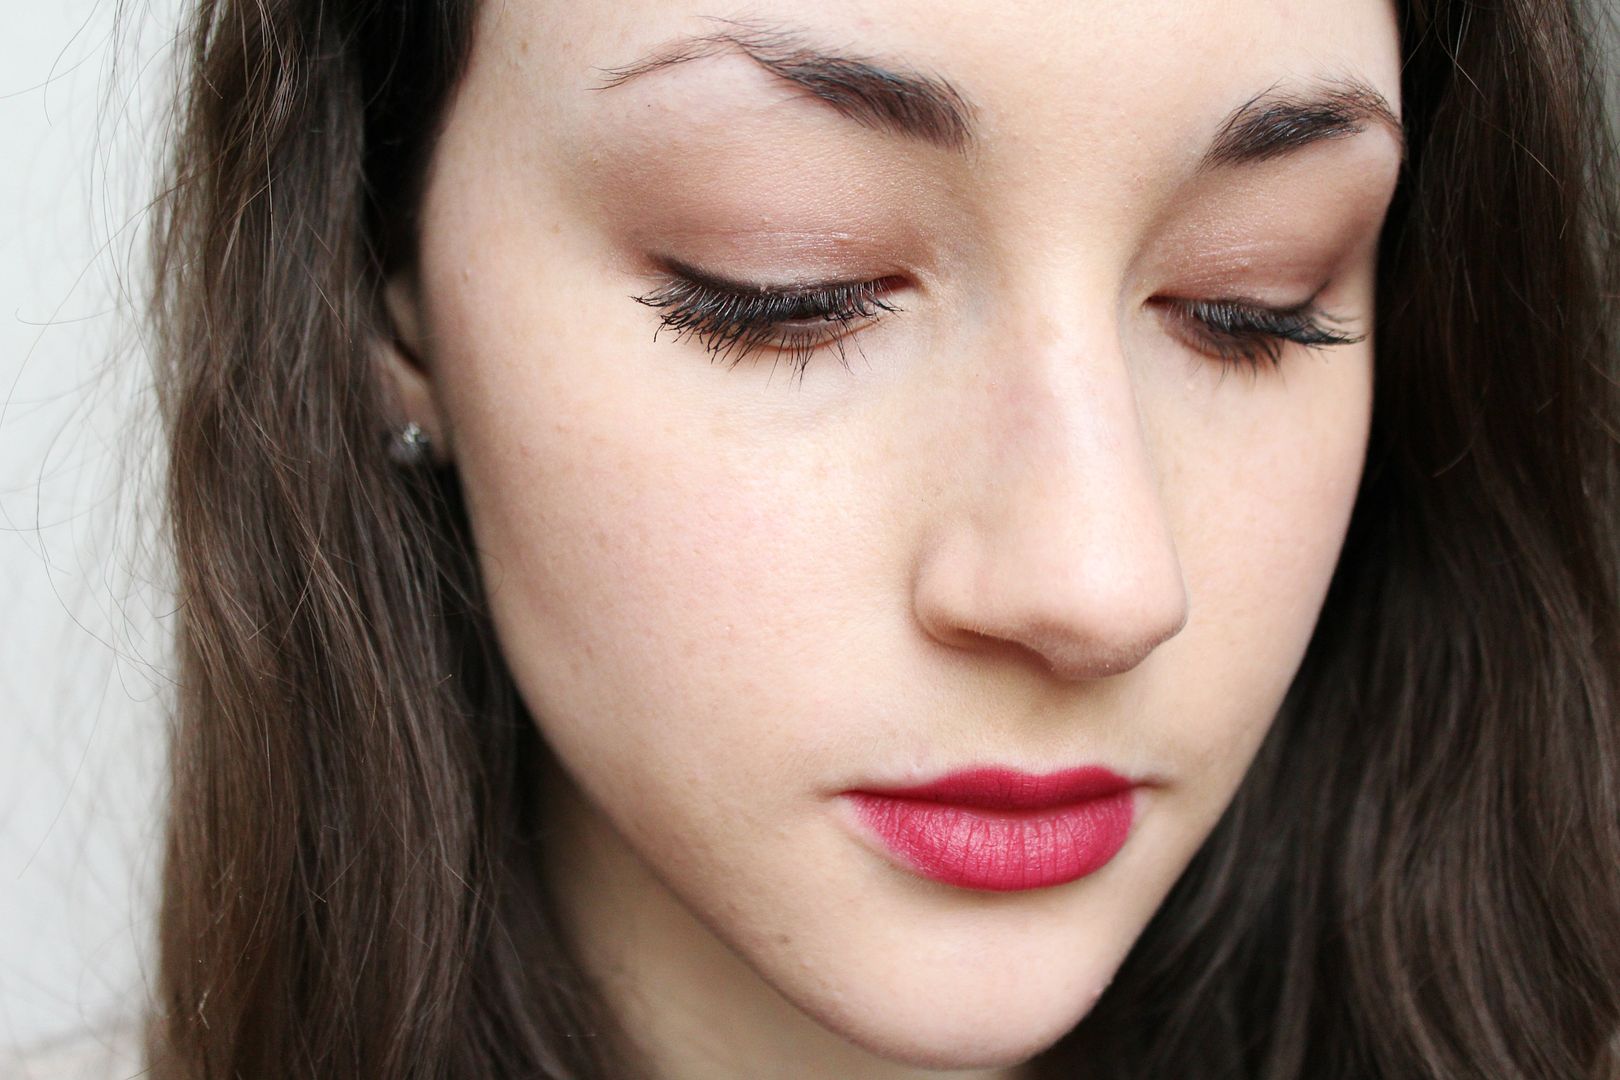 Bold-Red-Pink-Lip-Valtentines-Day-Makeup-Look-Close-Up-2015-Belle-Amie-UK-Beauty-Fashion-Lifestyle-Blog